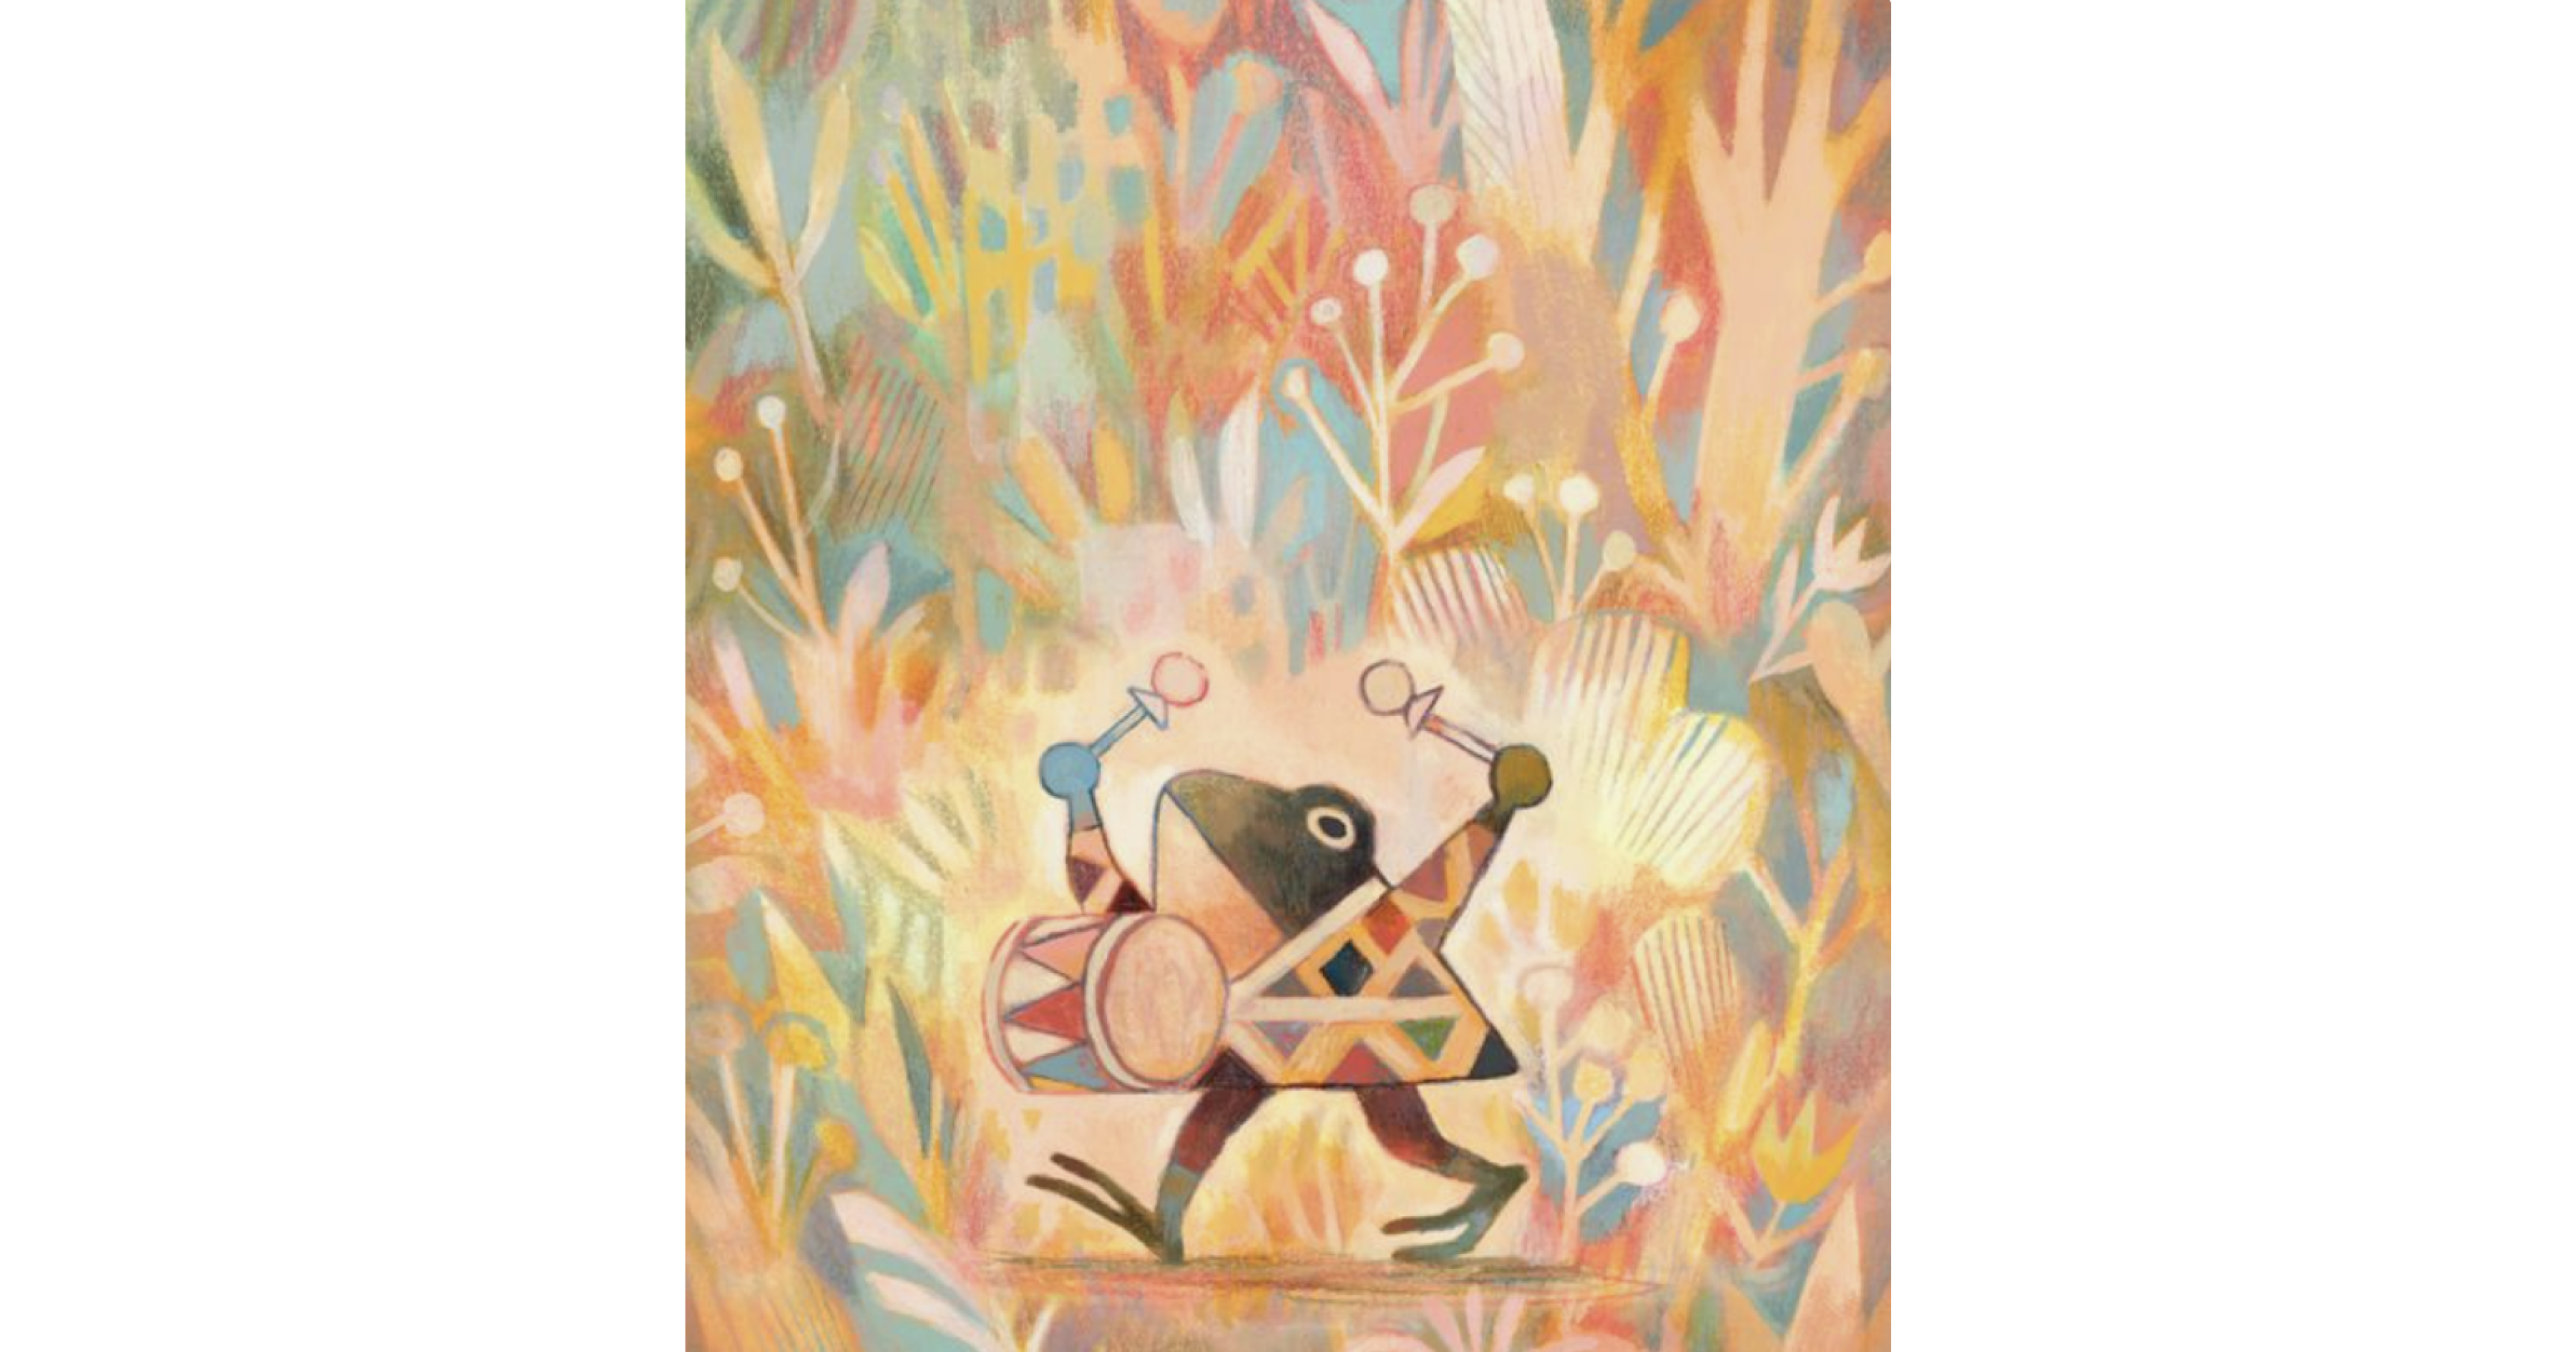 A frog excitedly beats a drum set while walking through the forest